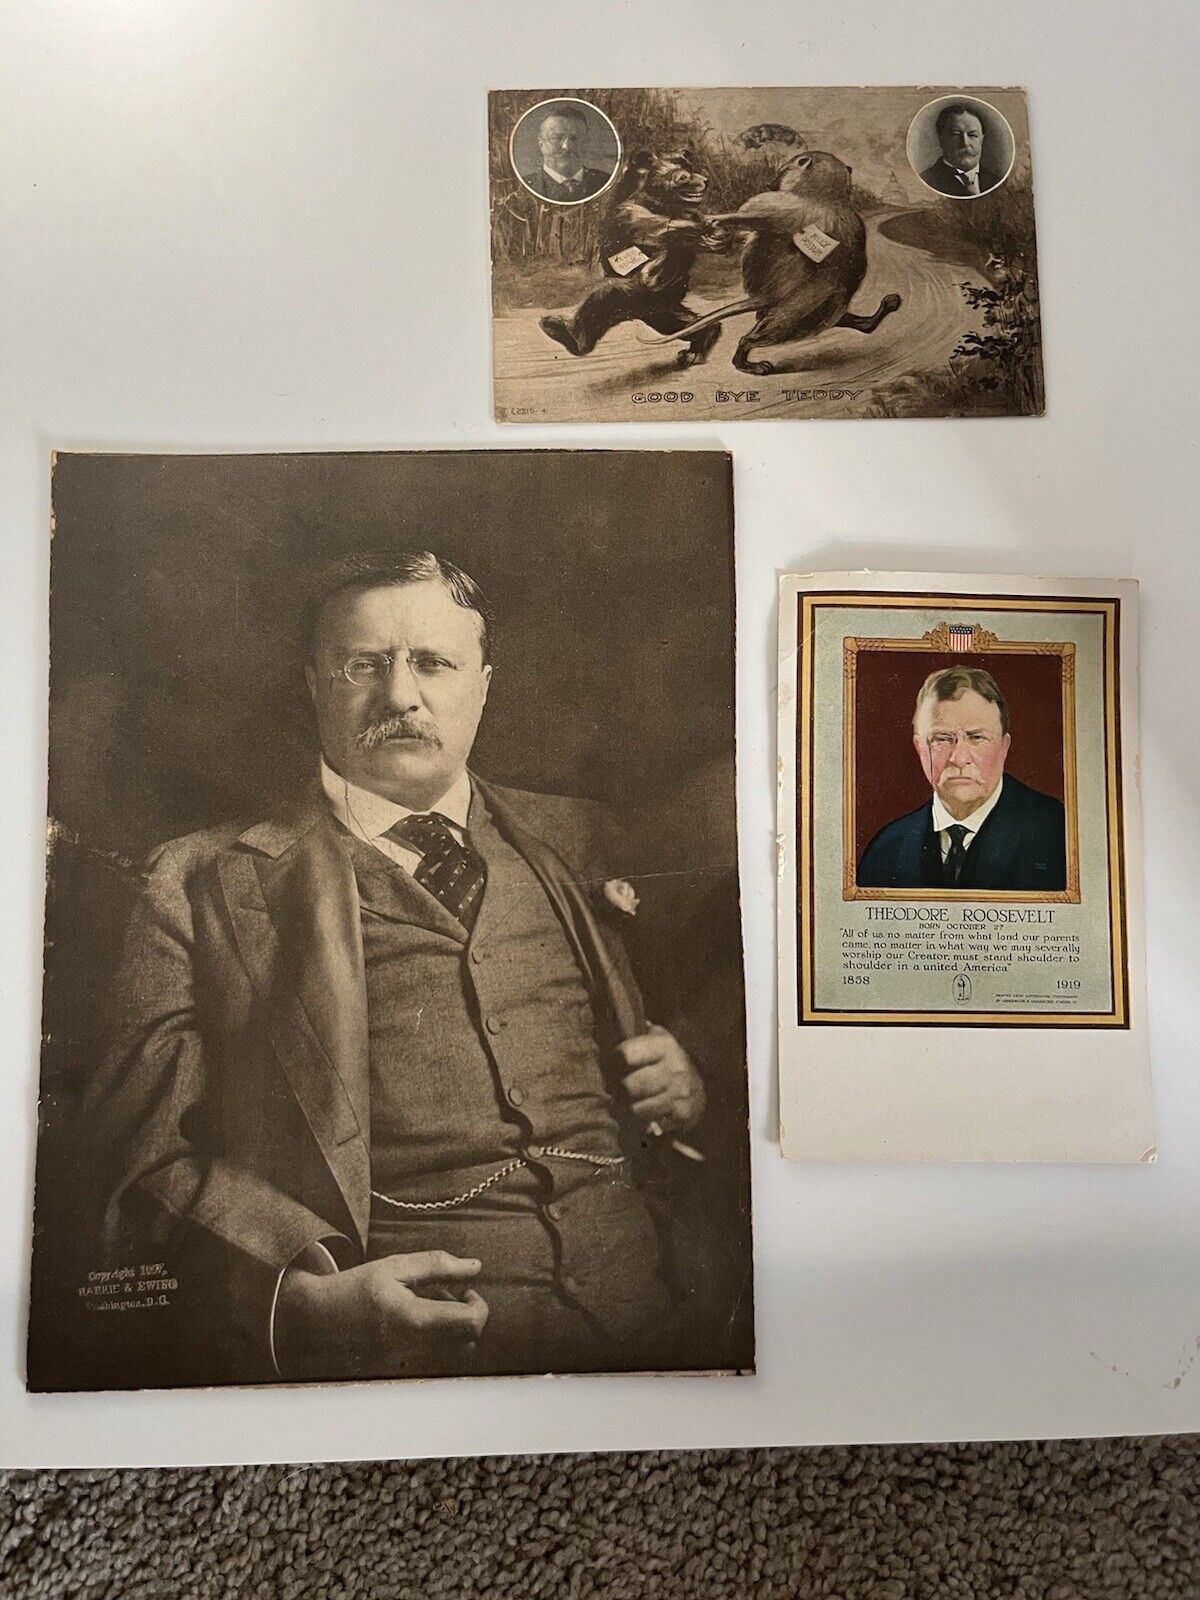 Harris & Ewing Photograph of Theodore Roosevelt With 2 Postcards